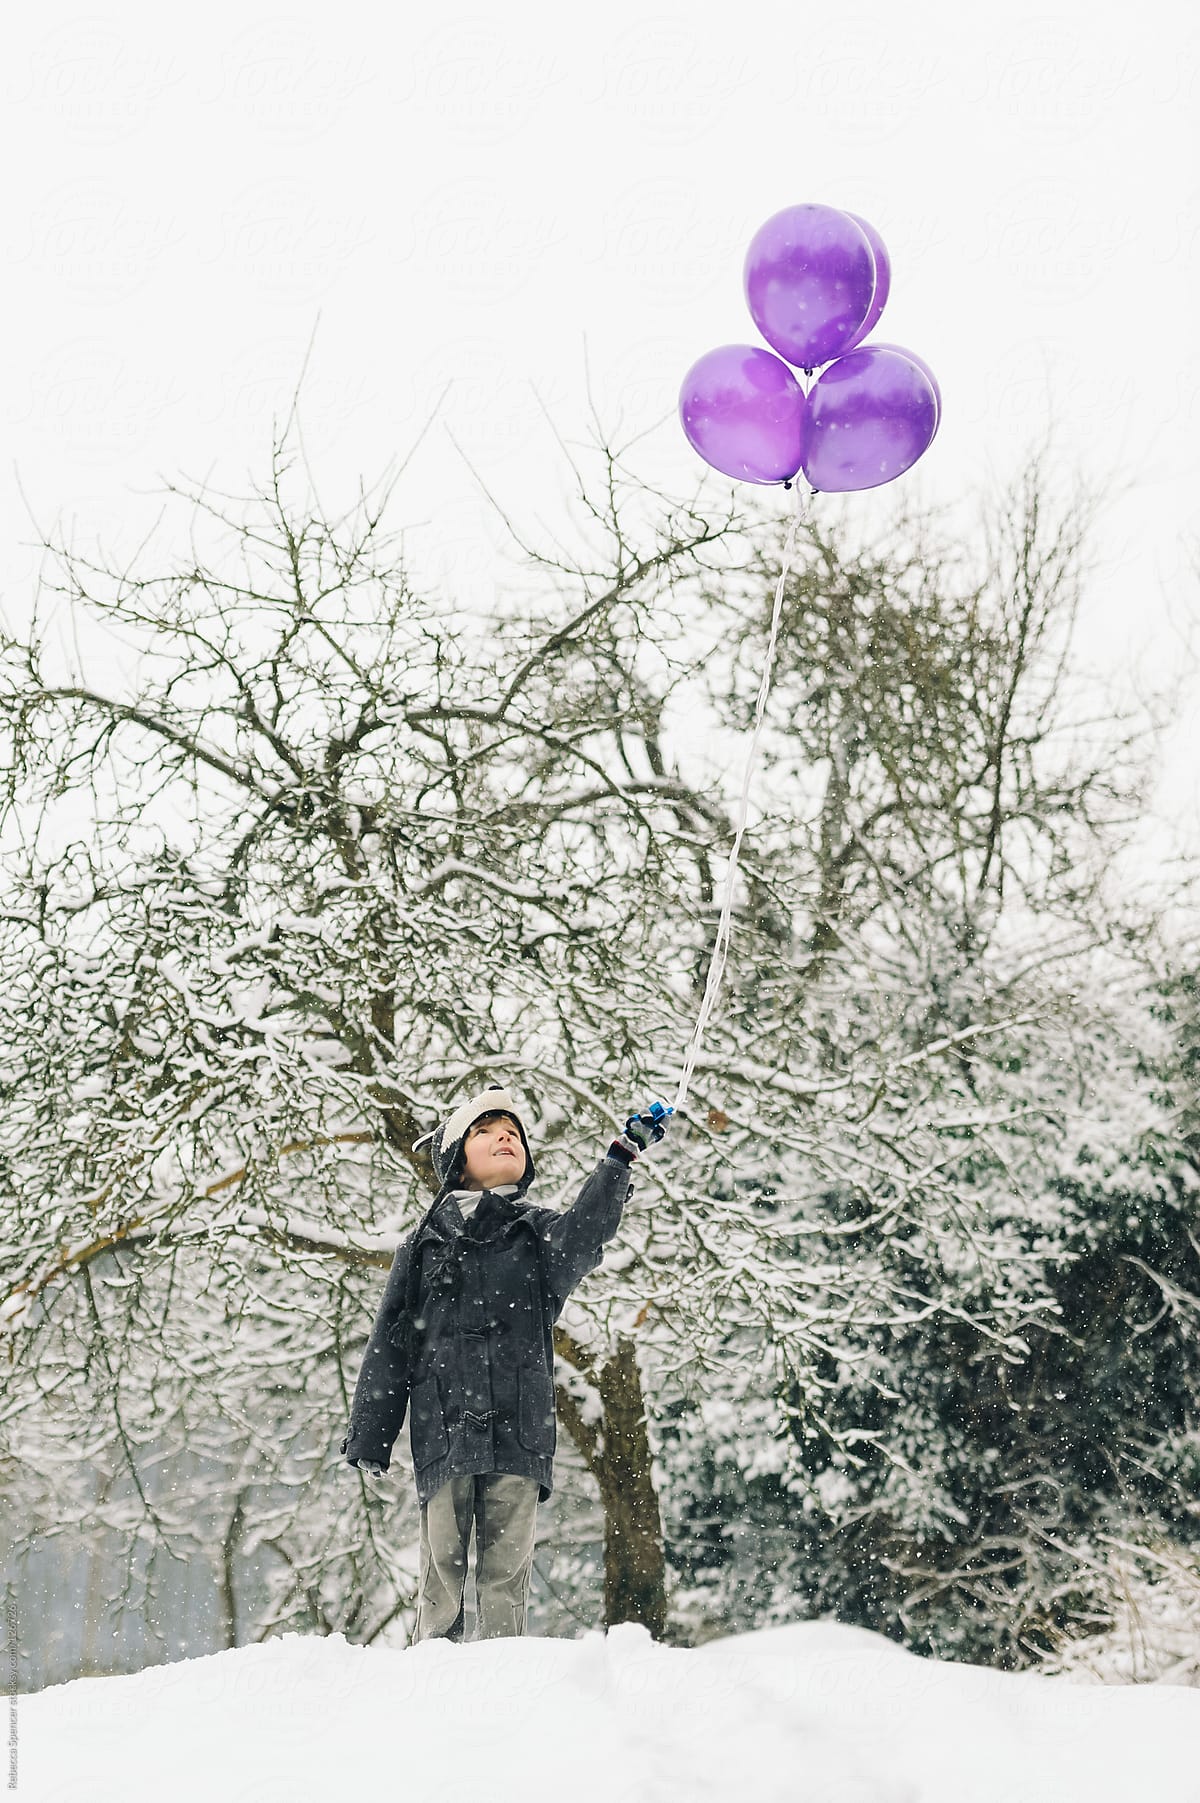 Child in snow holding purple balloons